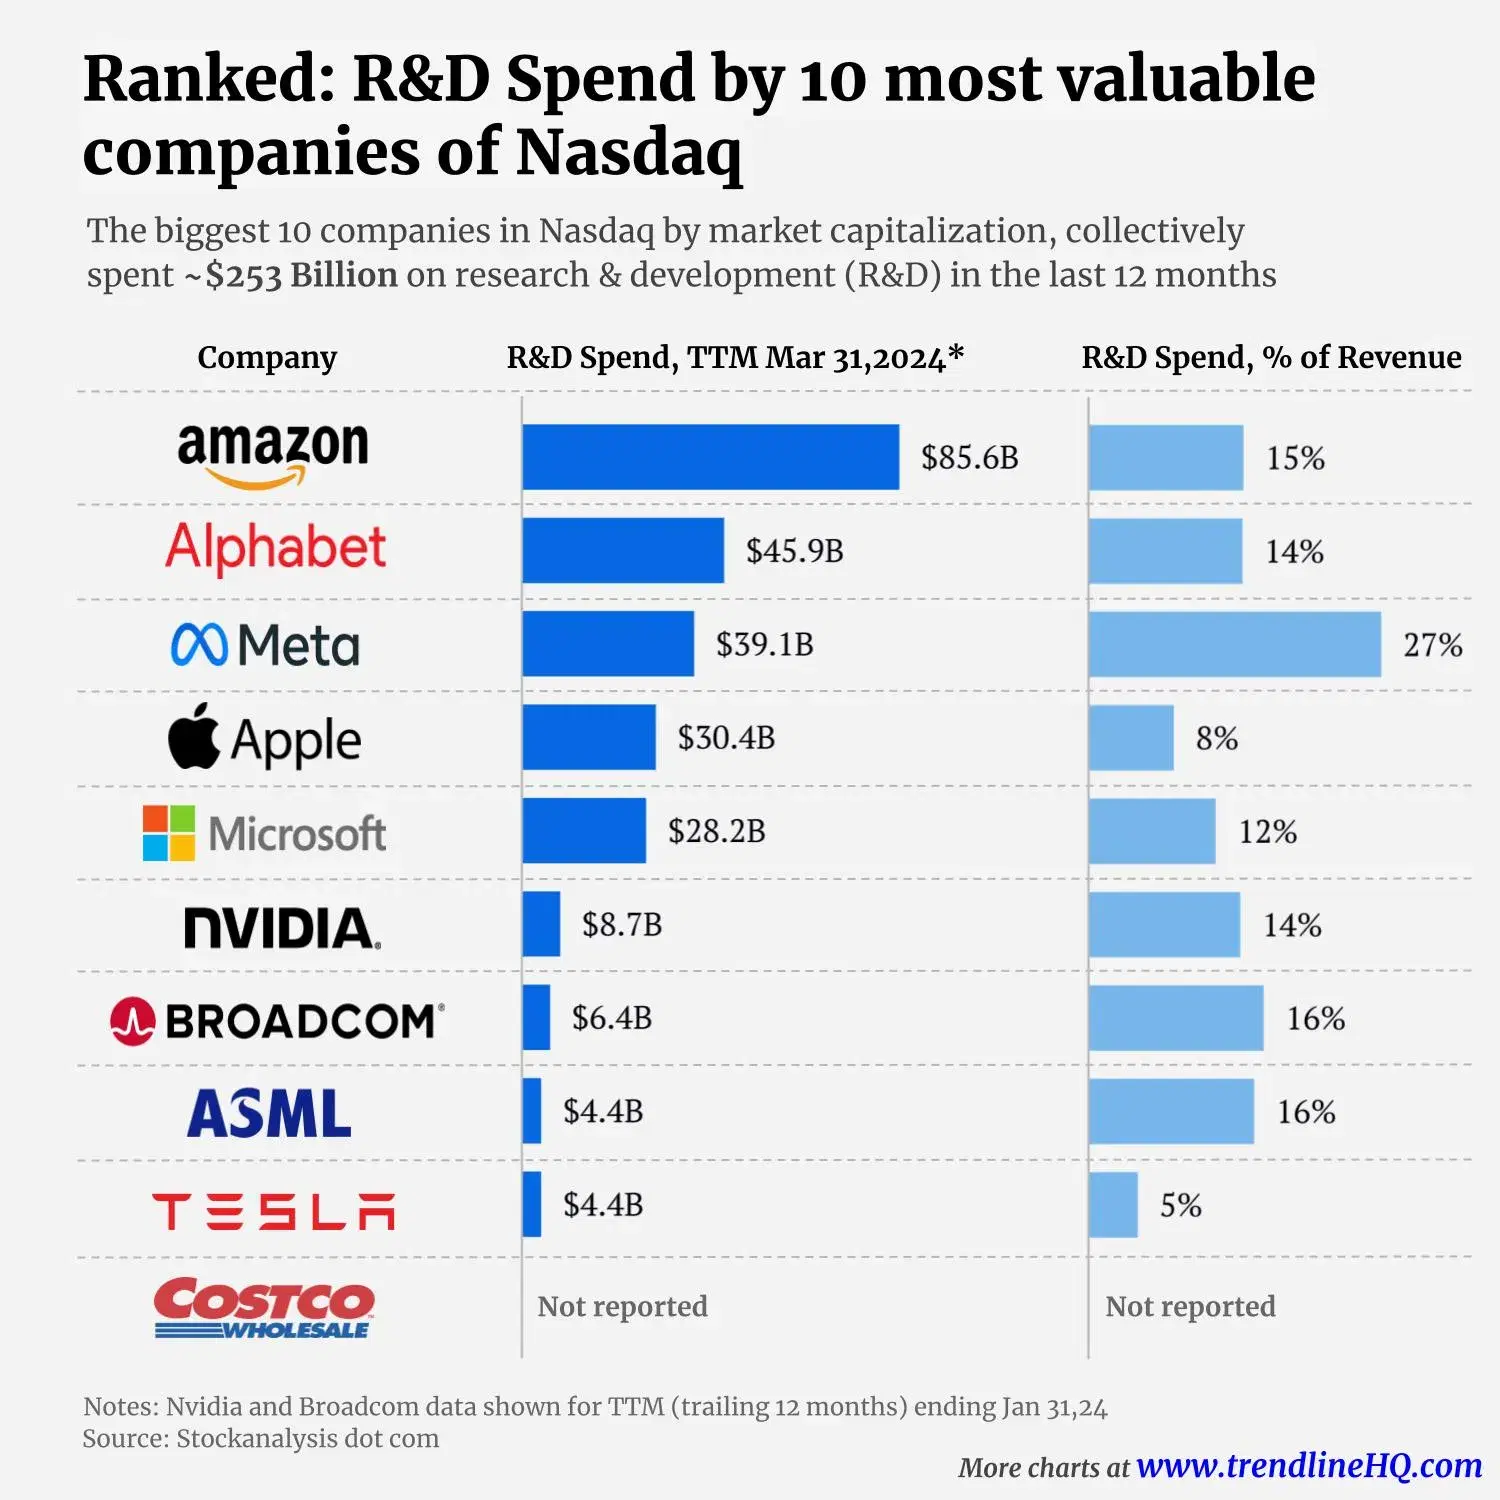 Amongst Big Tech, Amazon spends the most on R&D